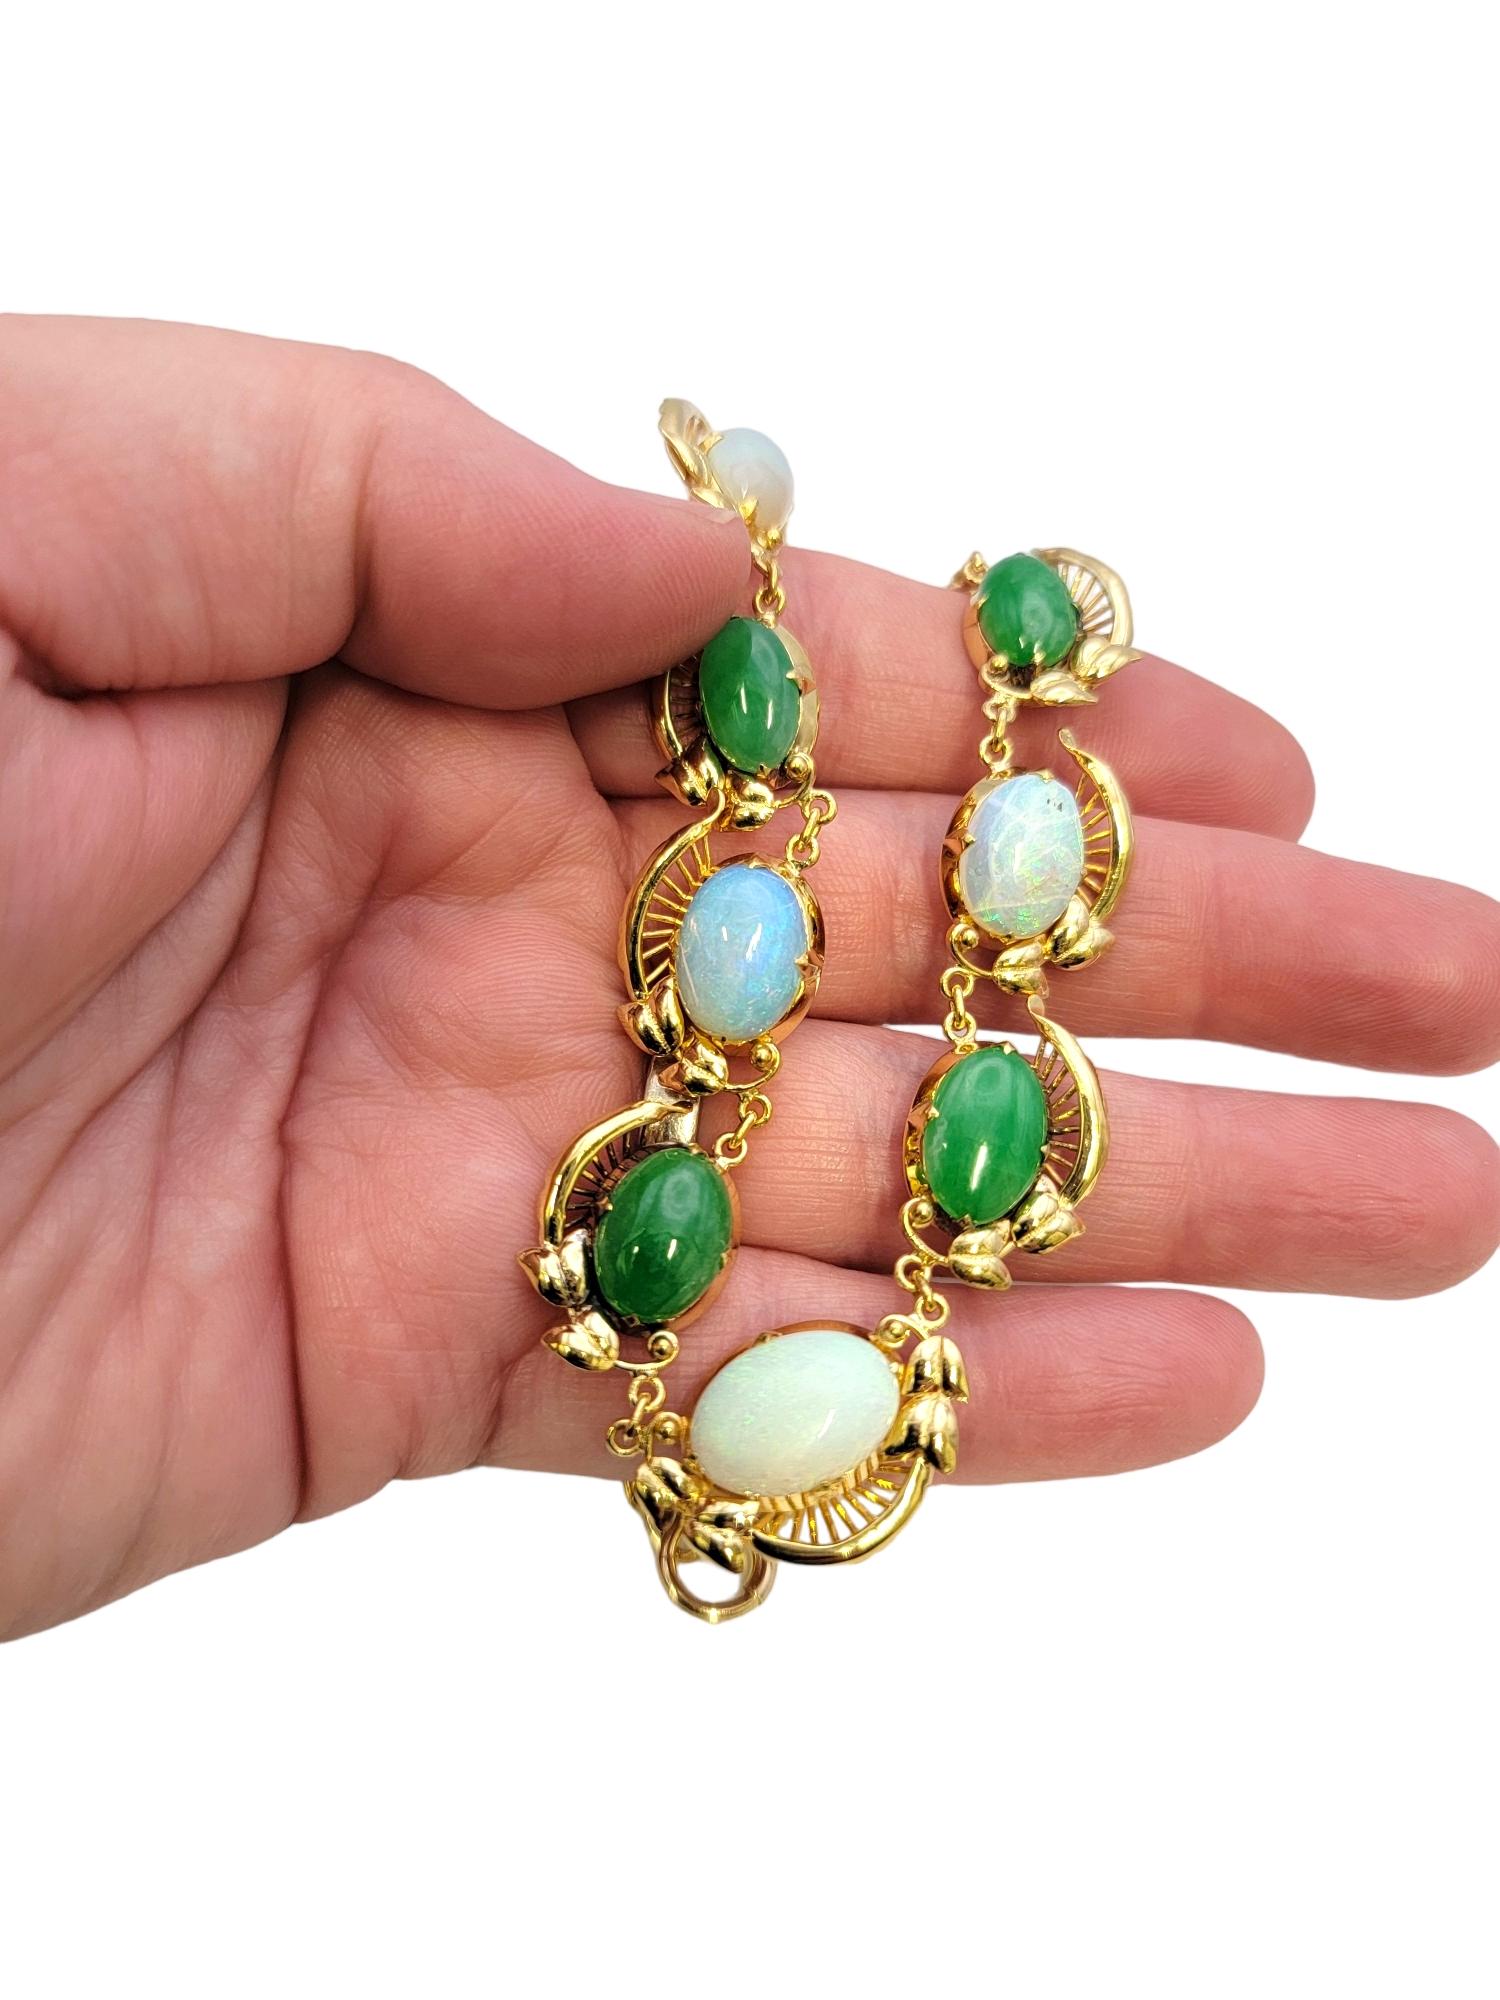 Graduated Oval Cabochon Jade and Opal Choker Necklace in Polished Yellow Gold For Sale 6